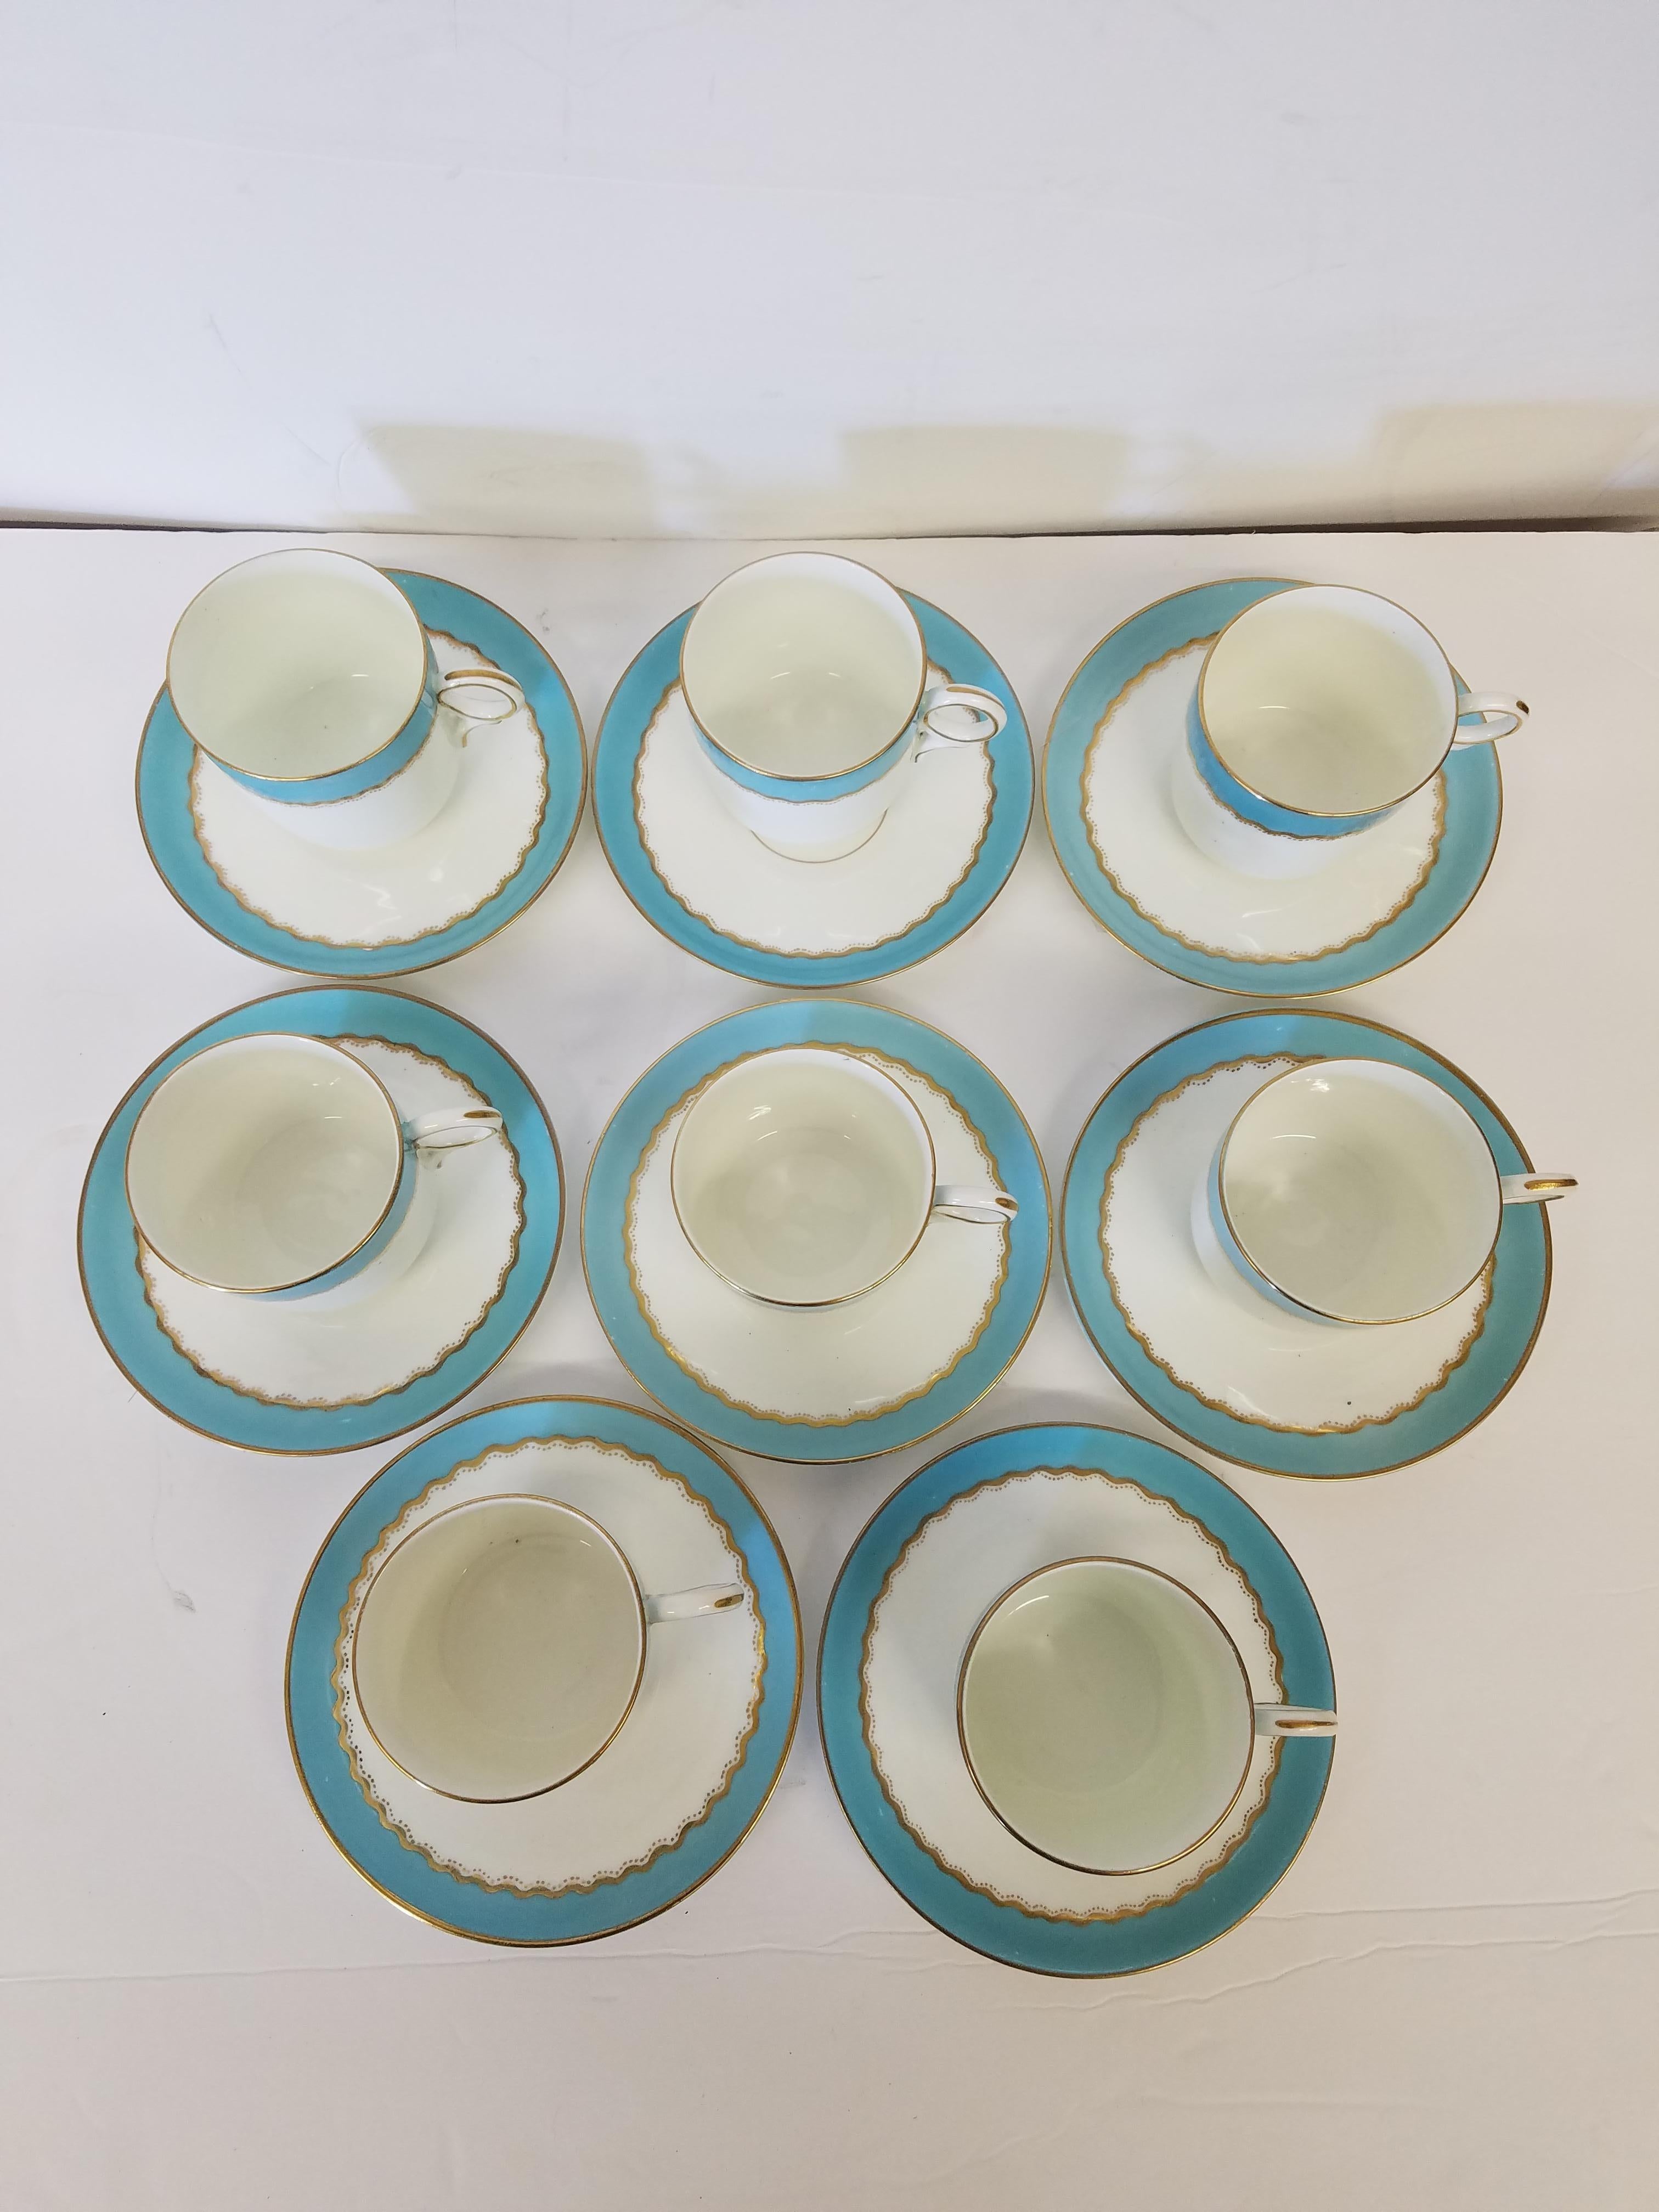 A Set of 8 French demi tasse cups and saucers in a robins egg blue with gilt trim. Turn of the century
Measures: 5.5 W x 3.5 H.